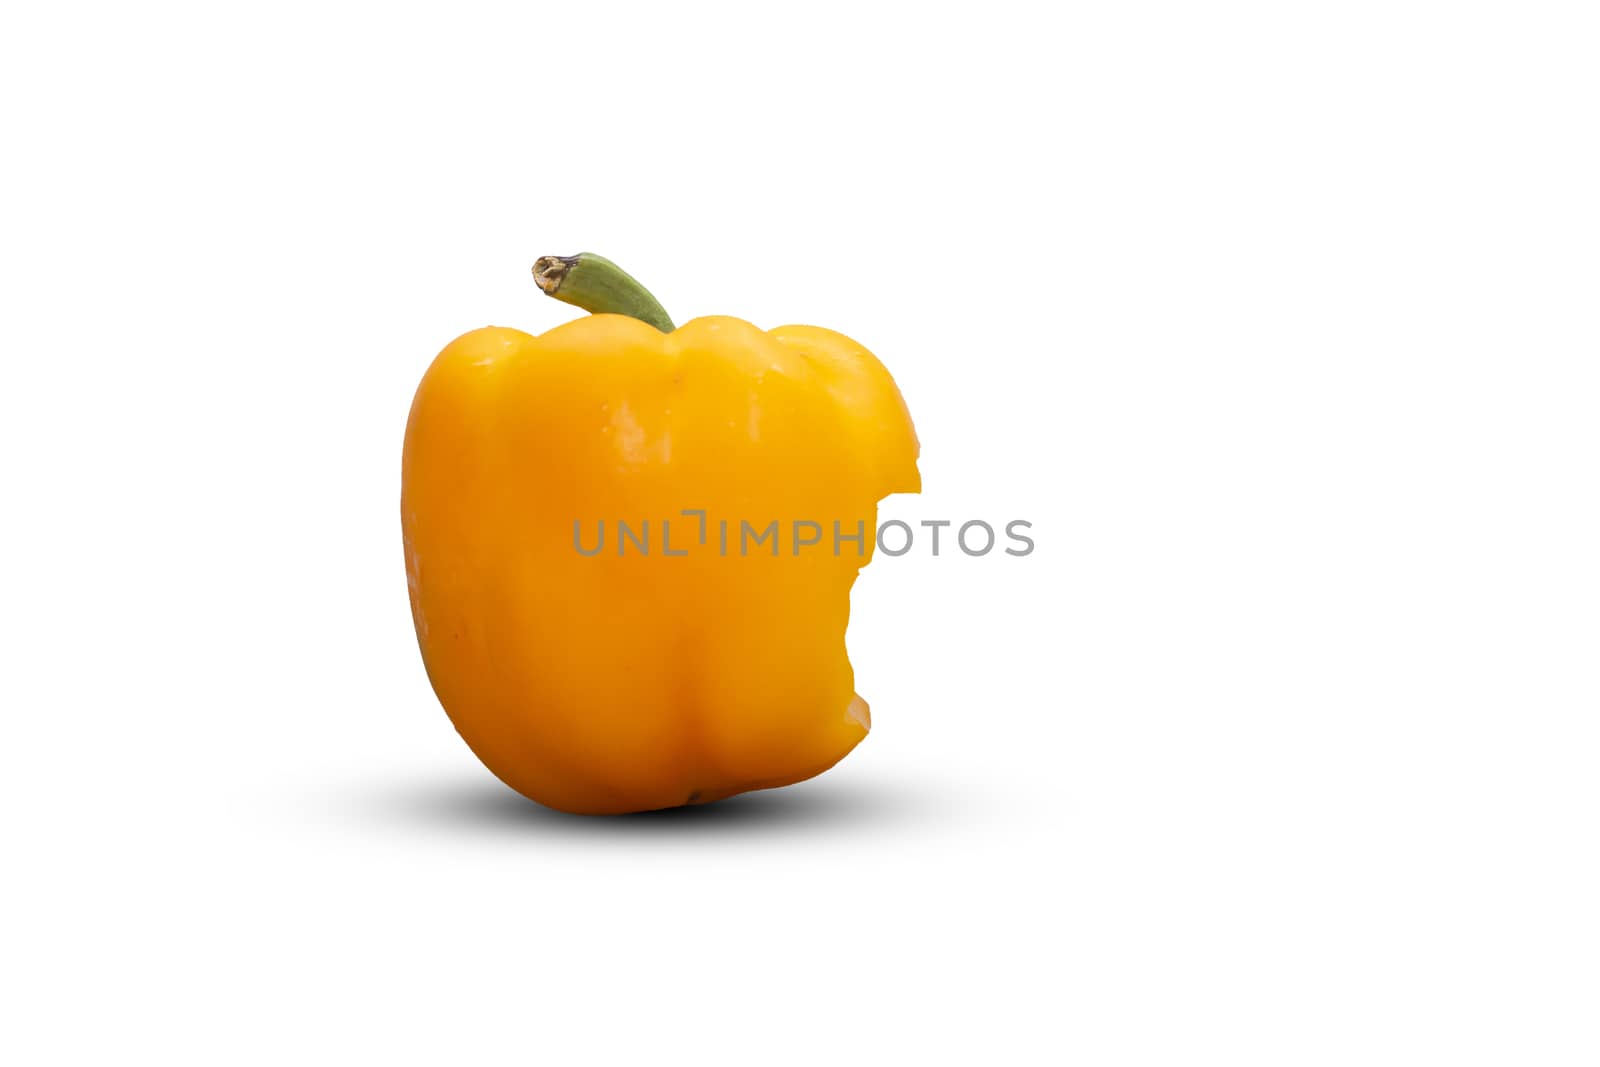 Bite yellow bell pepper  isolated on white background